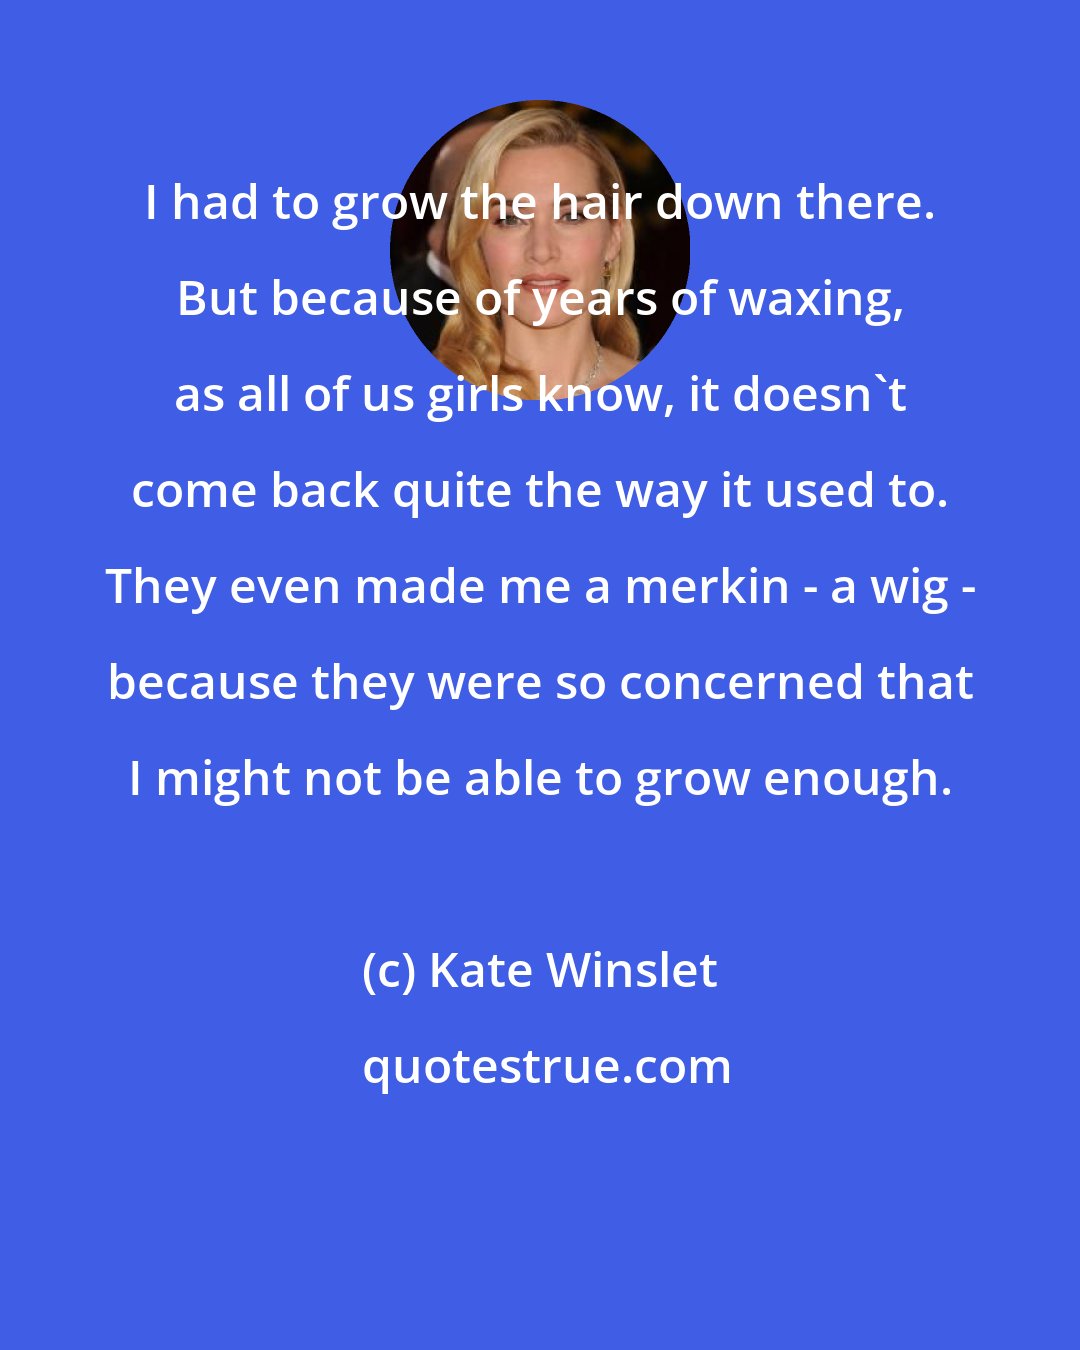 Kate Winslet: I had to grow the hair down there. But because of years of waxing, as all of us girls know, it doesn't come back quite the way it used to. They even made me a merkin - a wig - because they were so concerned that I might not be able to grow enough.